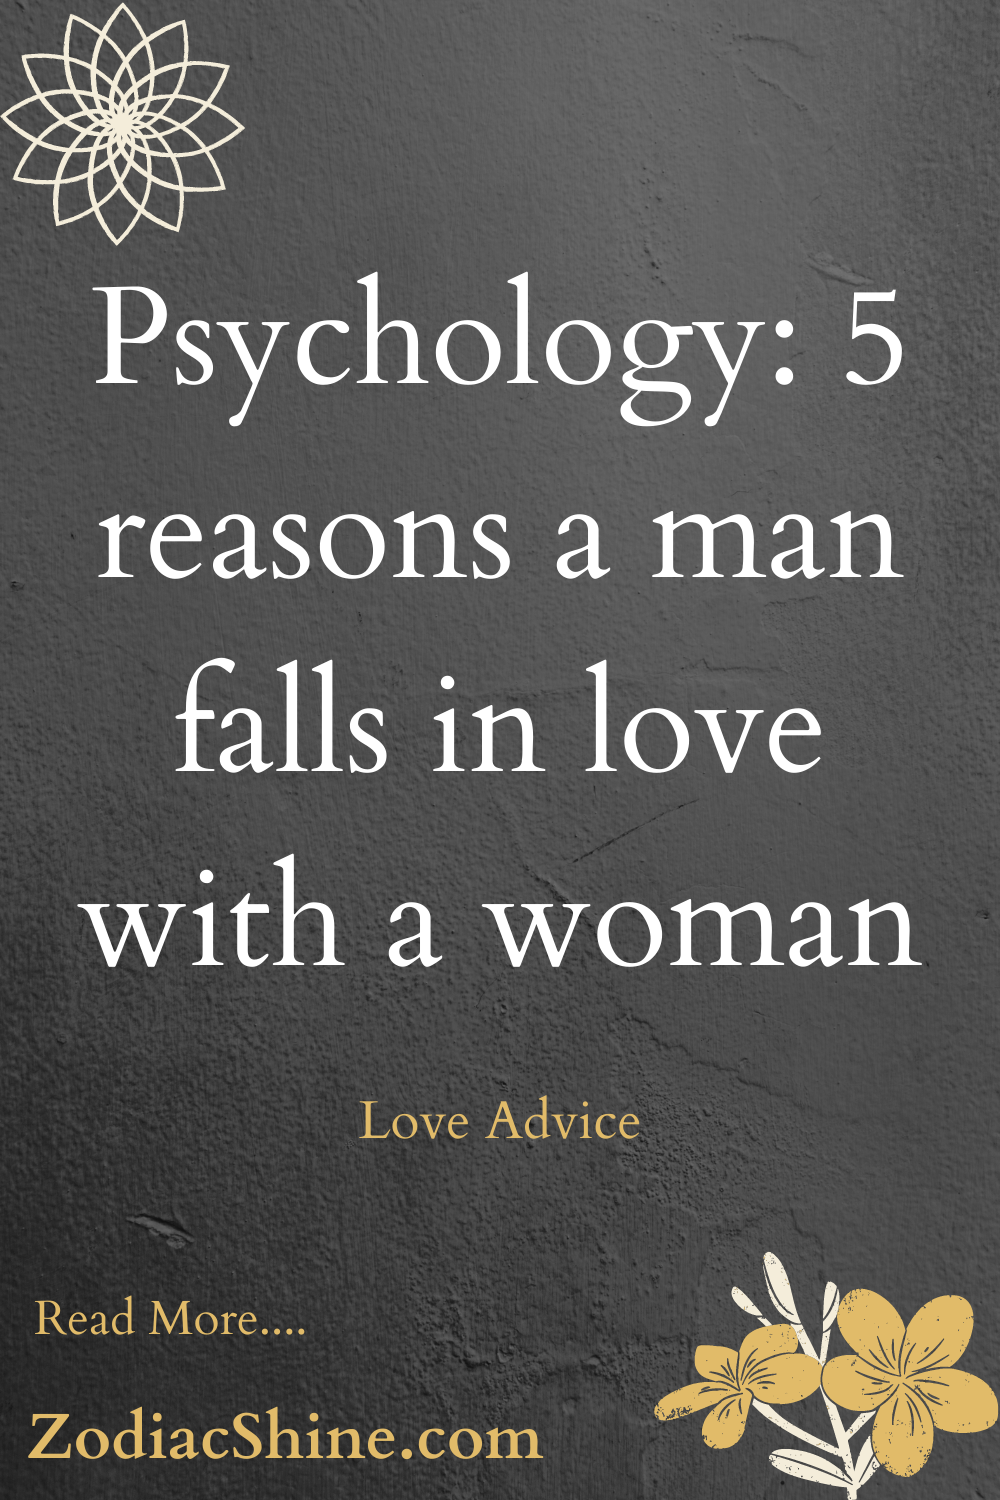 Psychology: 5 reasons a man falls in love with a woman